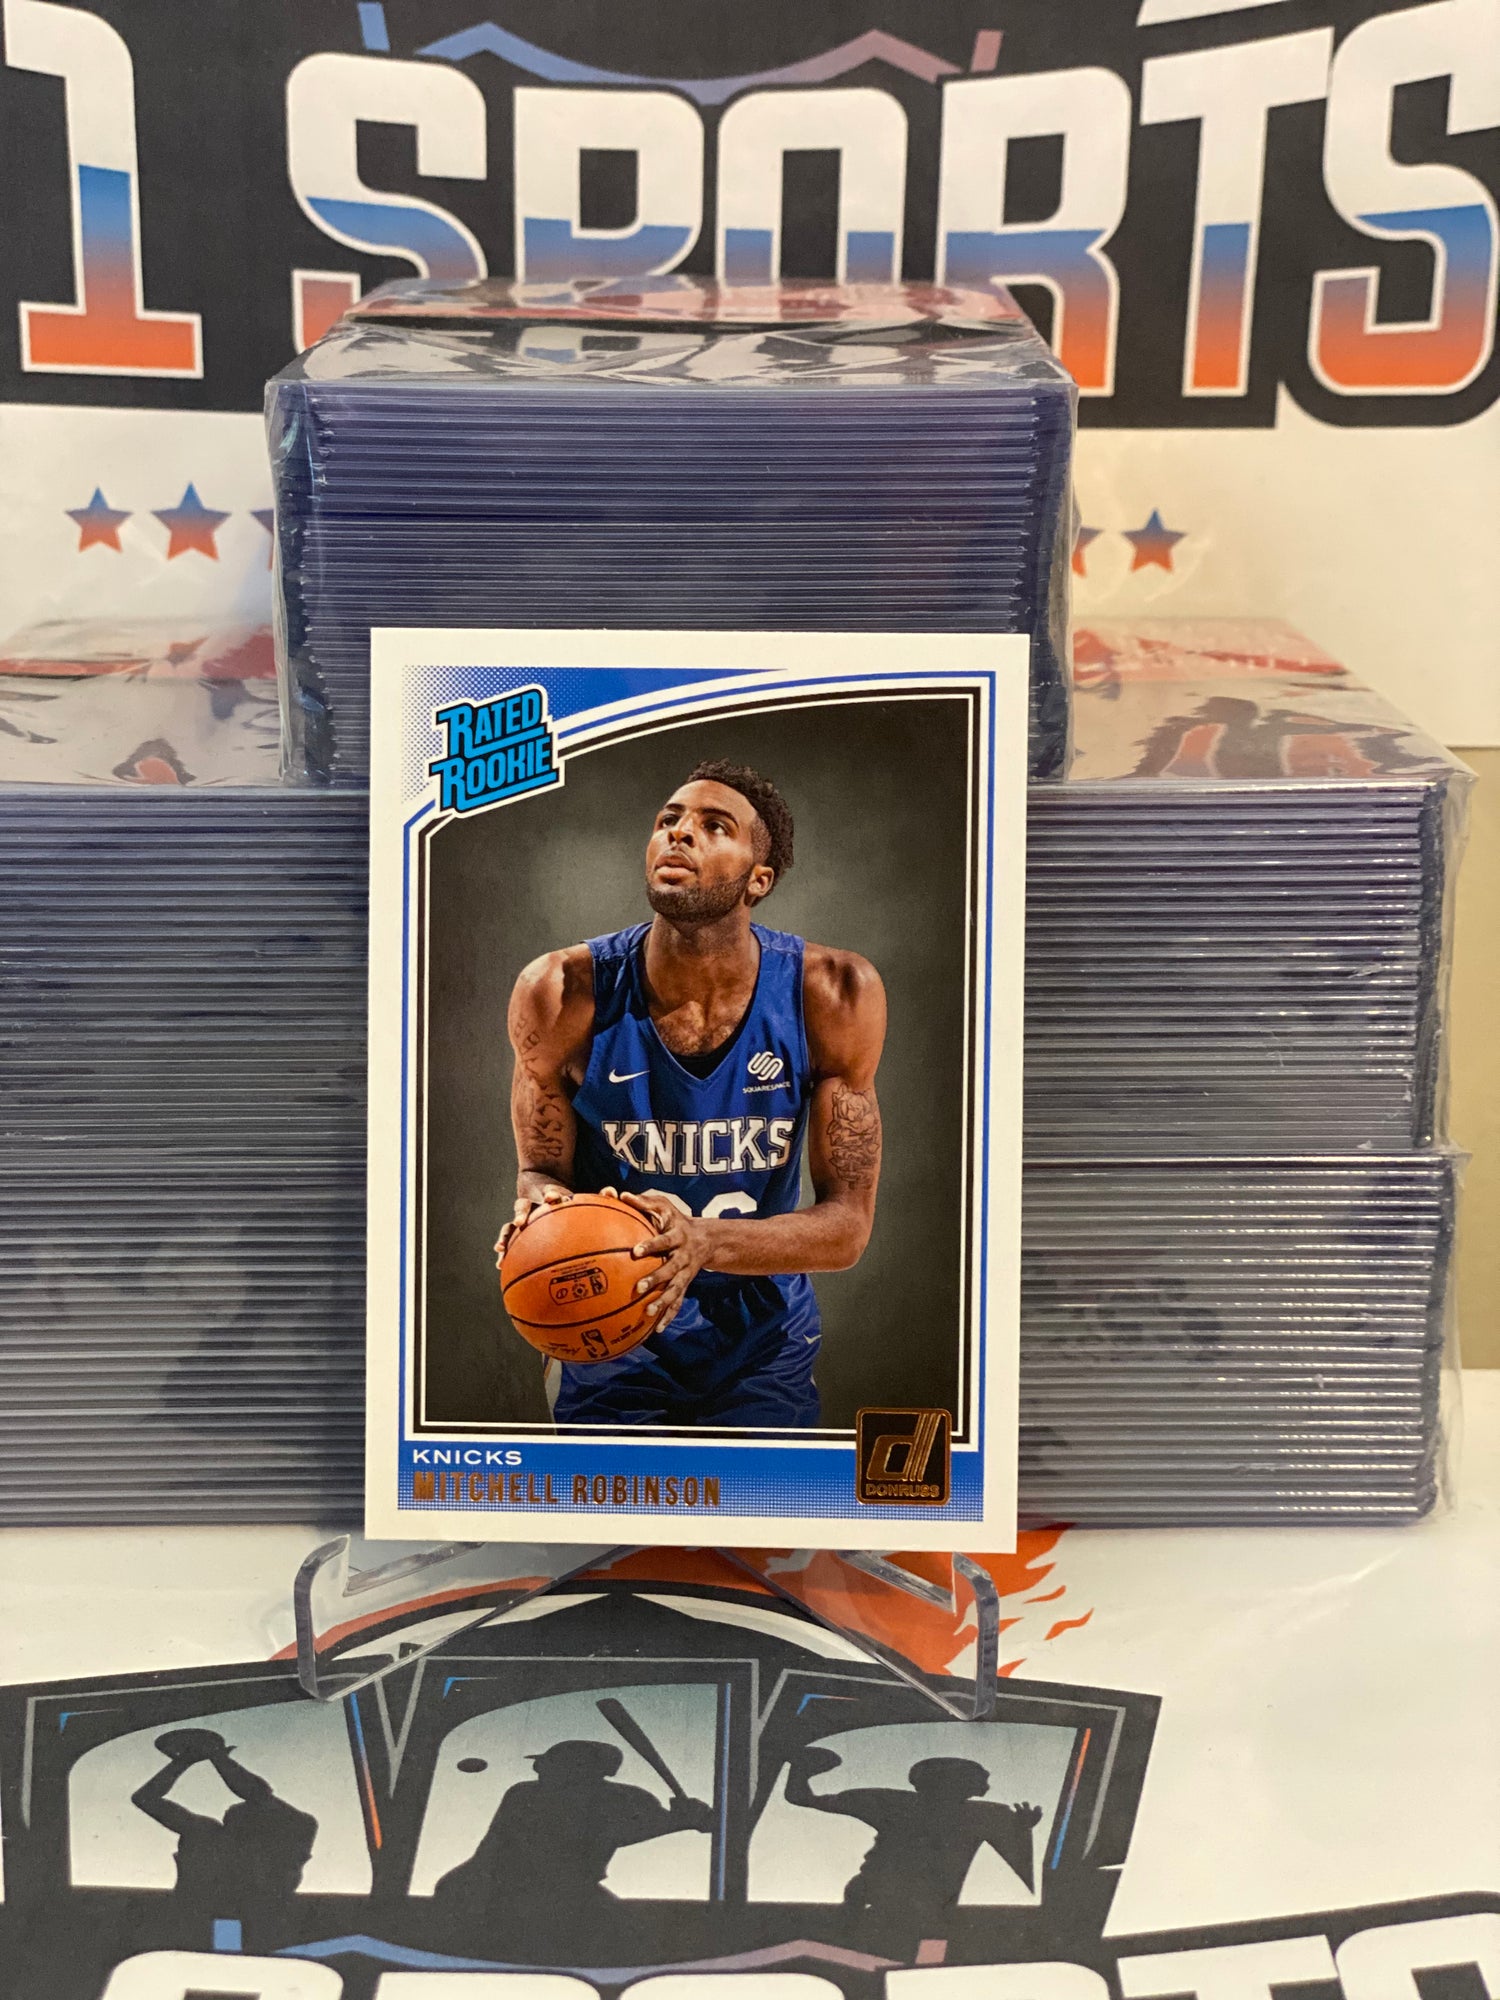 2018 Donruss (Rated Rookie) Mitchell Robinson #163